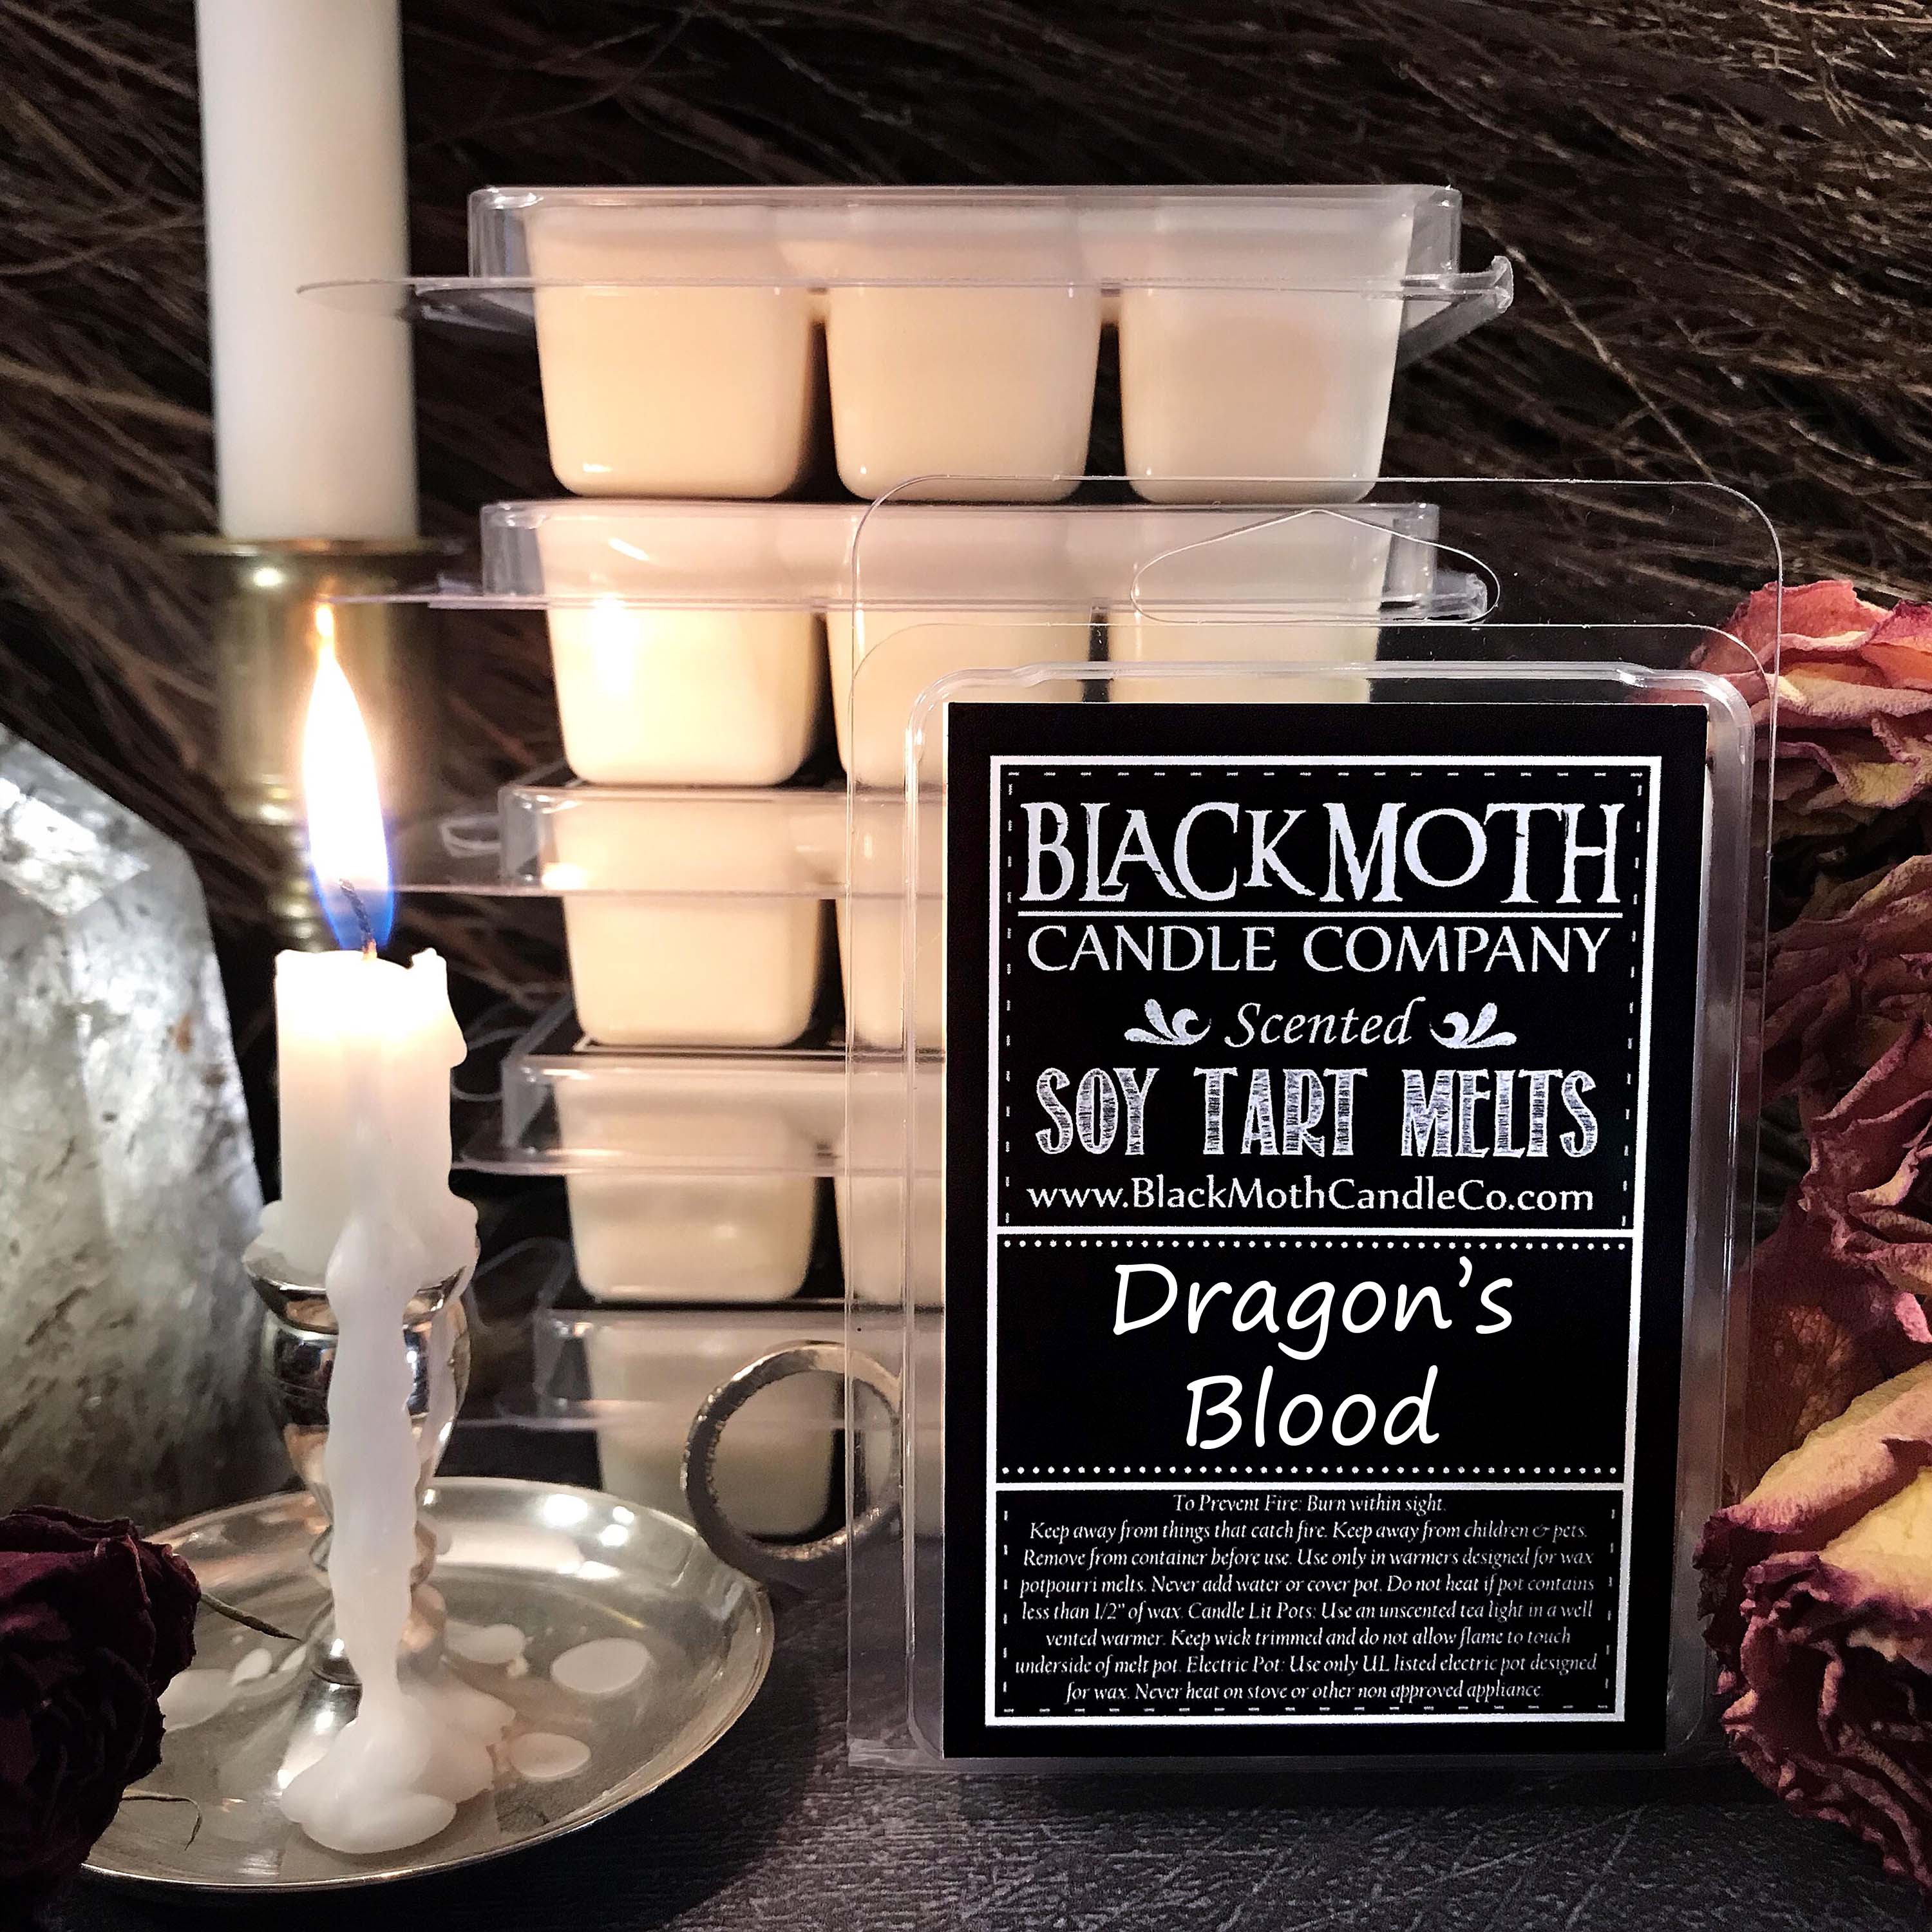 Dragon's Blood Scented Soy Wax Melts